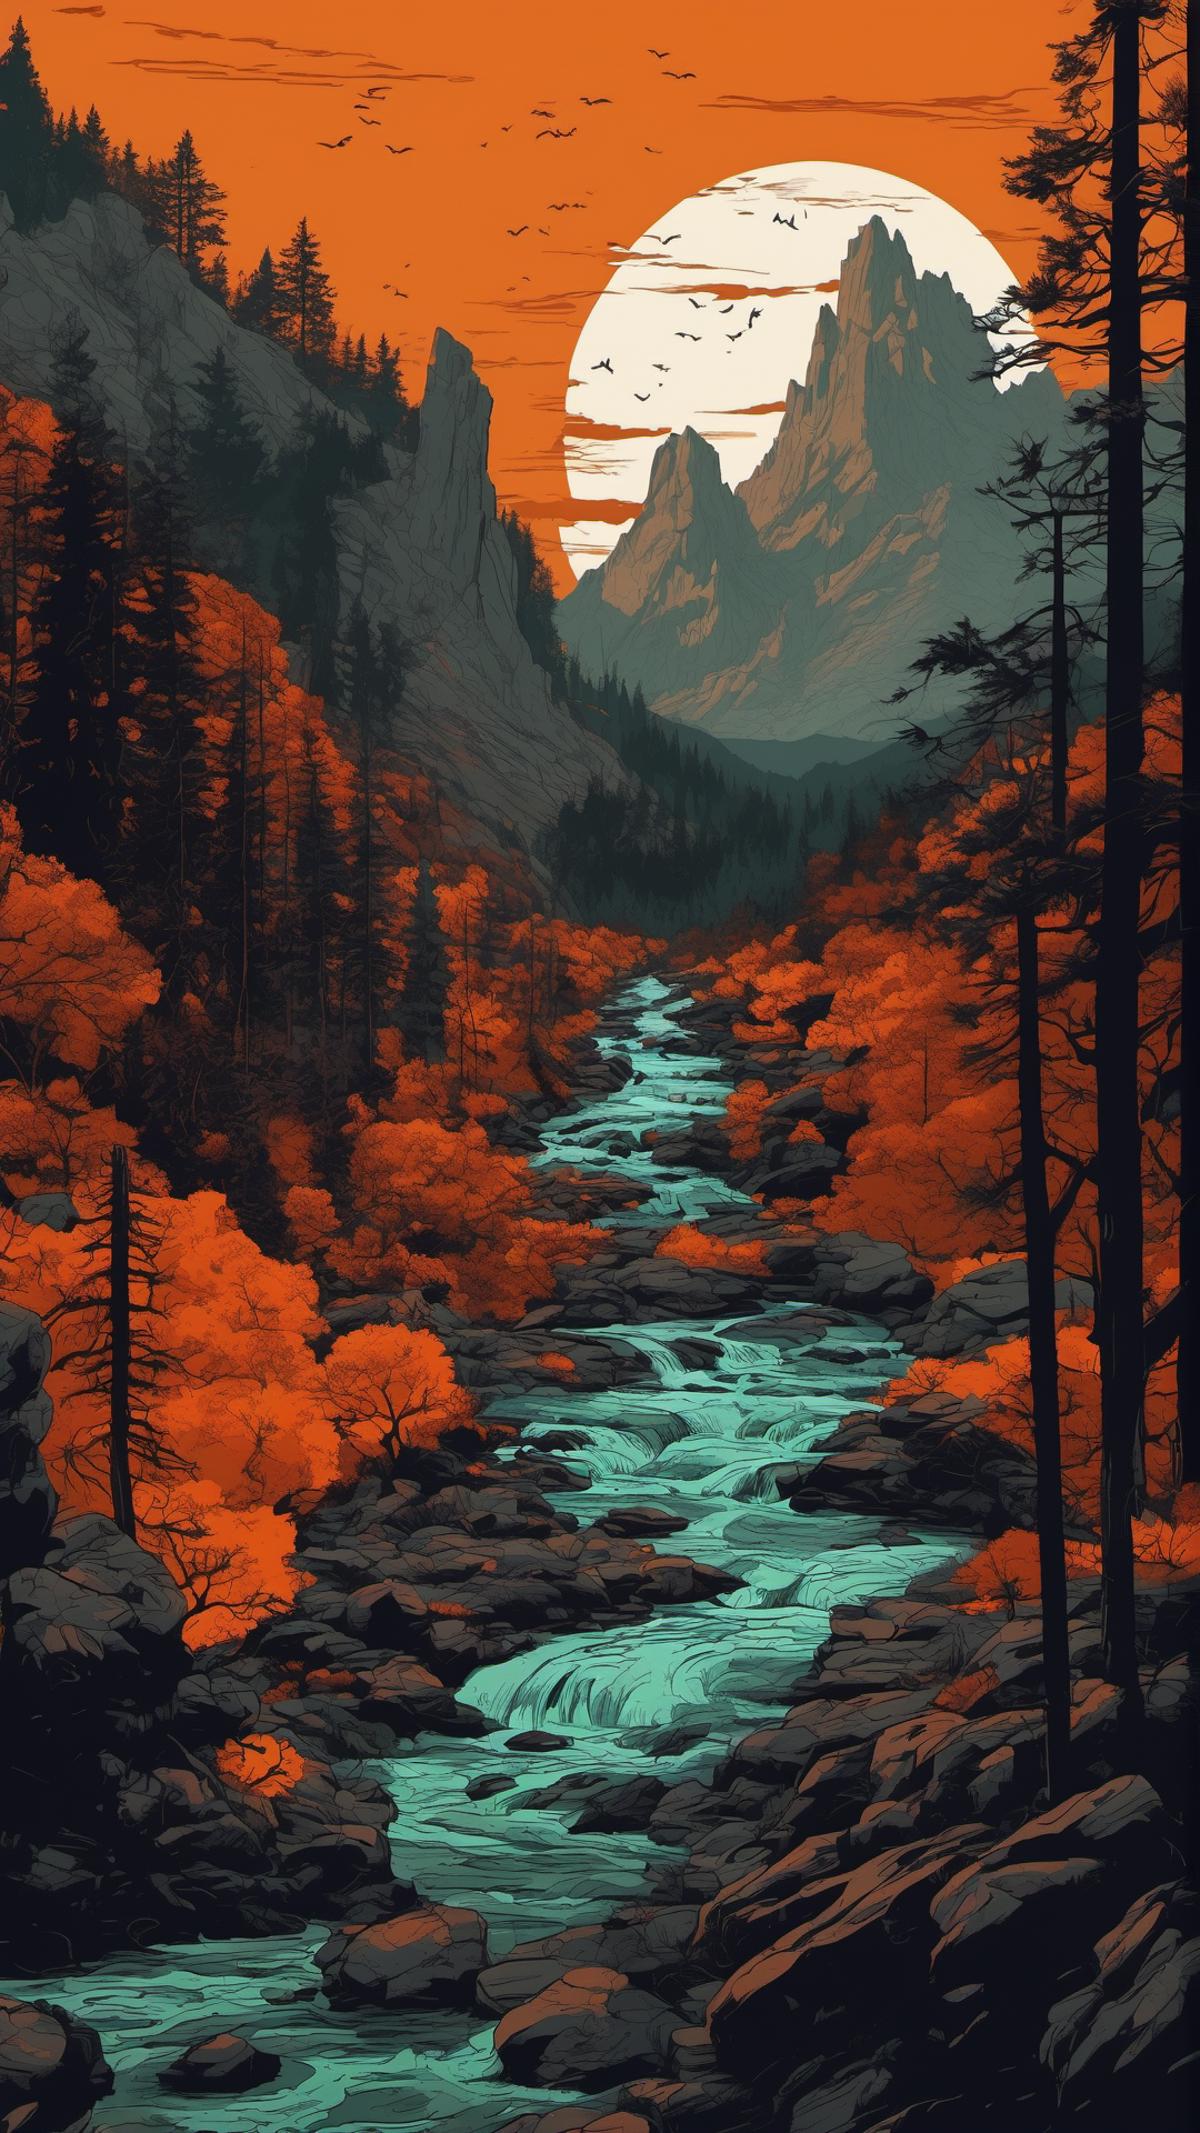 The image is titled "River in the Mountains."